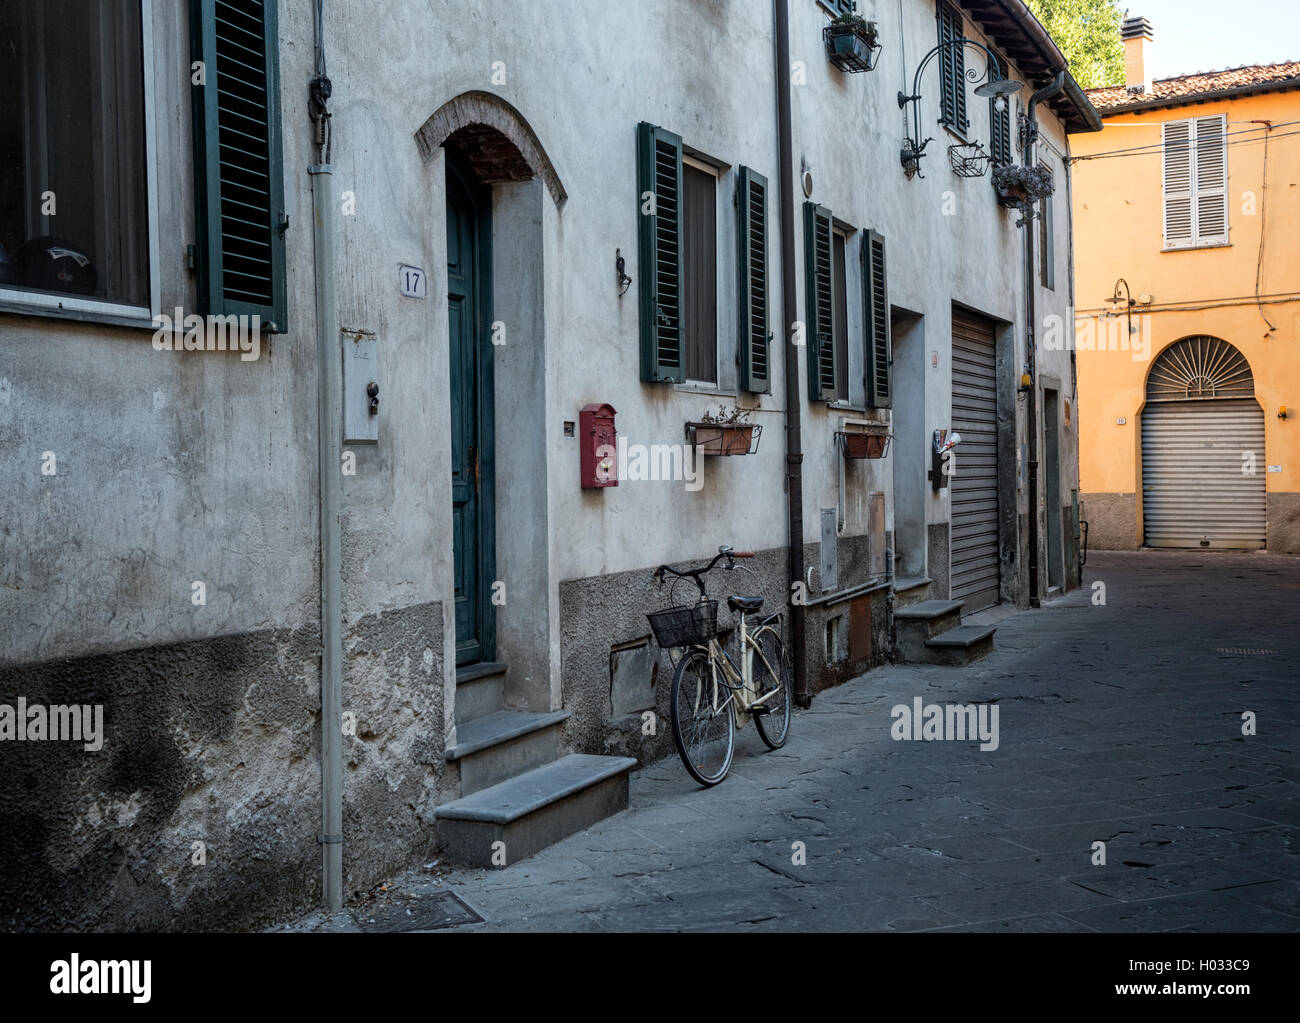 Bicycle in an old residential area of the city of Lucca, Tuscany, Italy Stock Photo